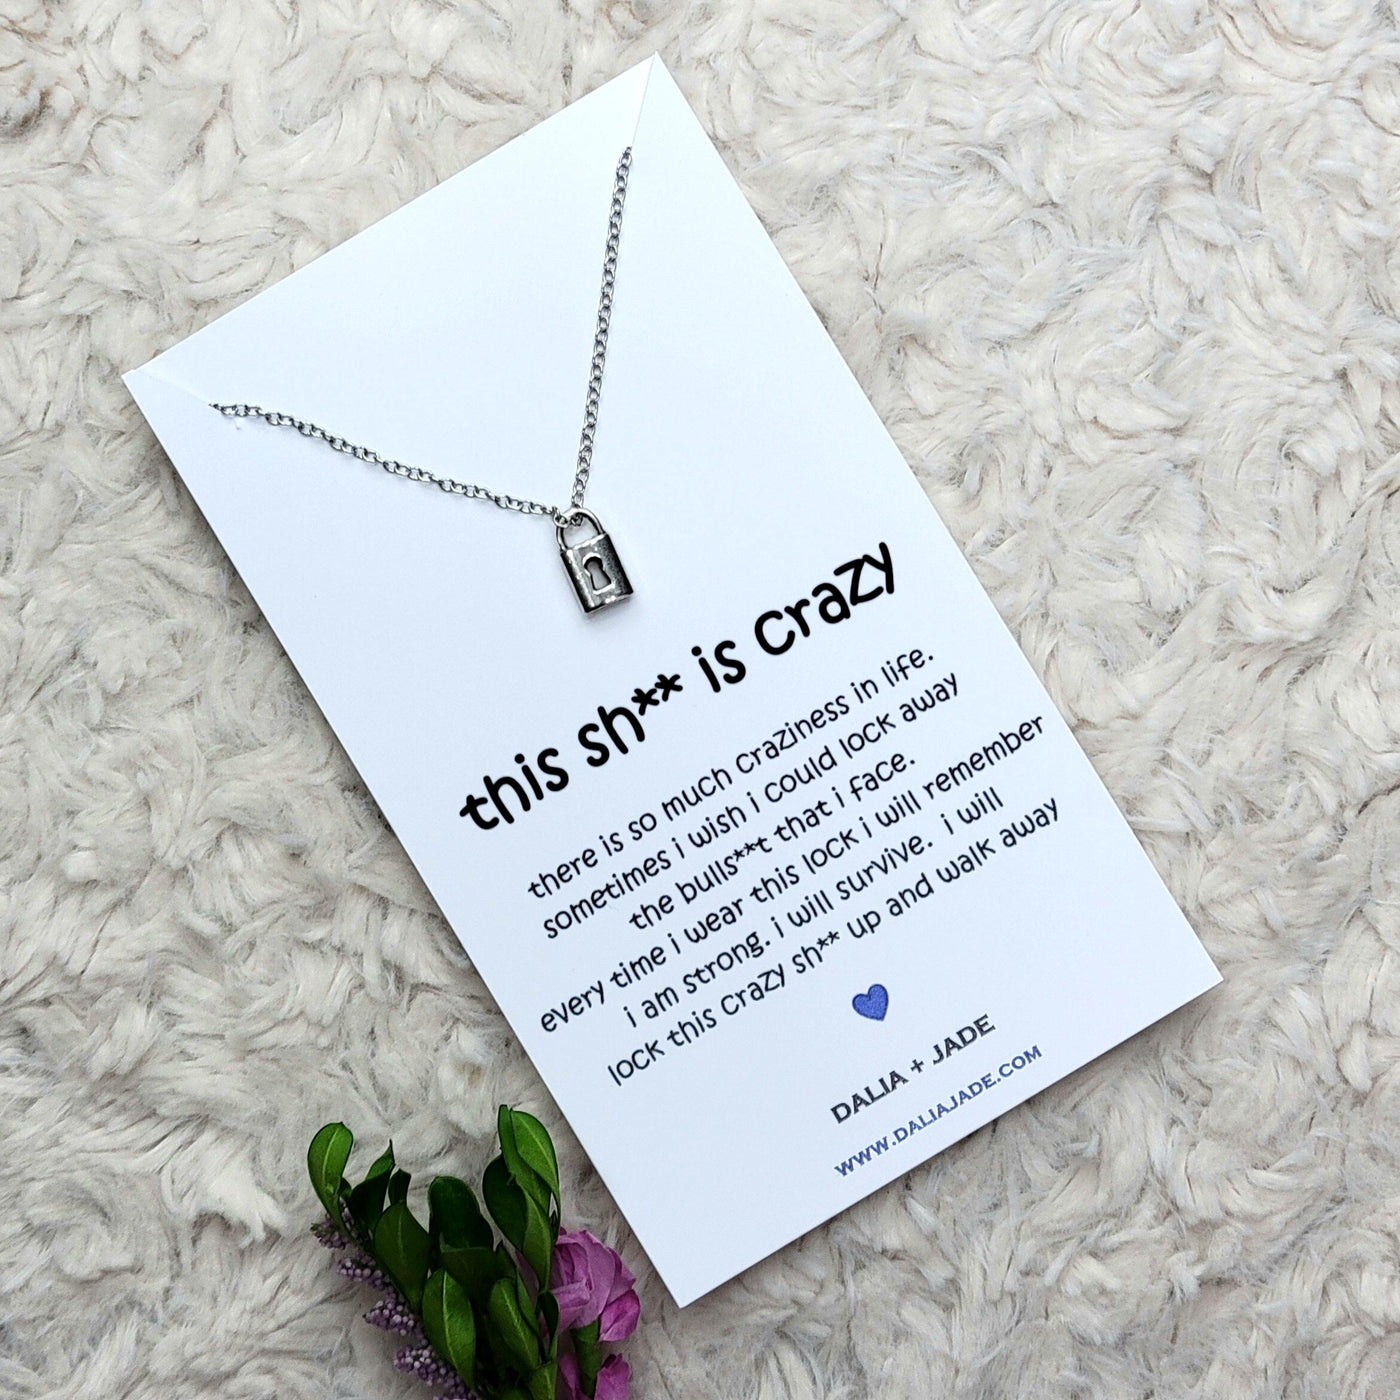 This Sh** is Crazy - Lock Necklace -Hilarious Necklace Gift Idea - Accessories - dalia + jade 